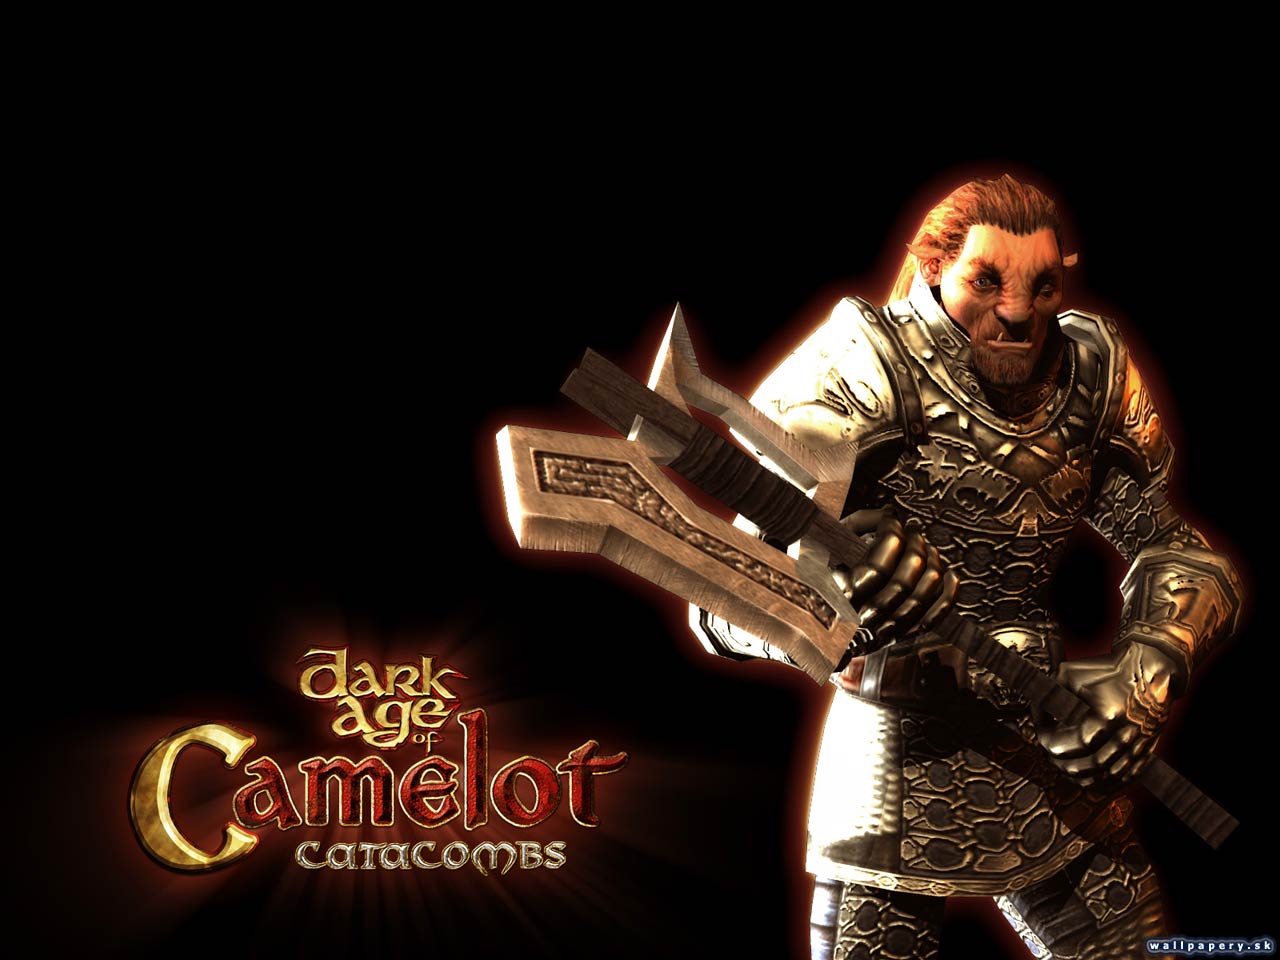 Dark Age of Camelot: Catacombs - wallpaper 2